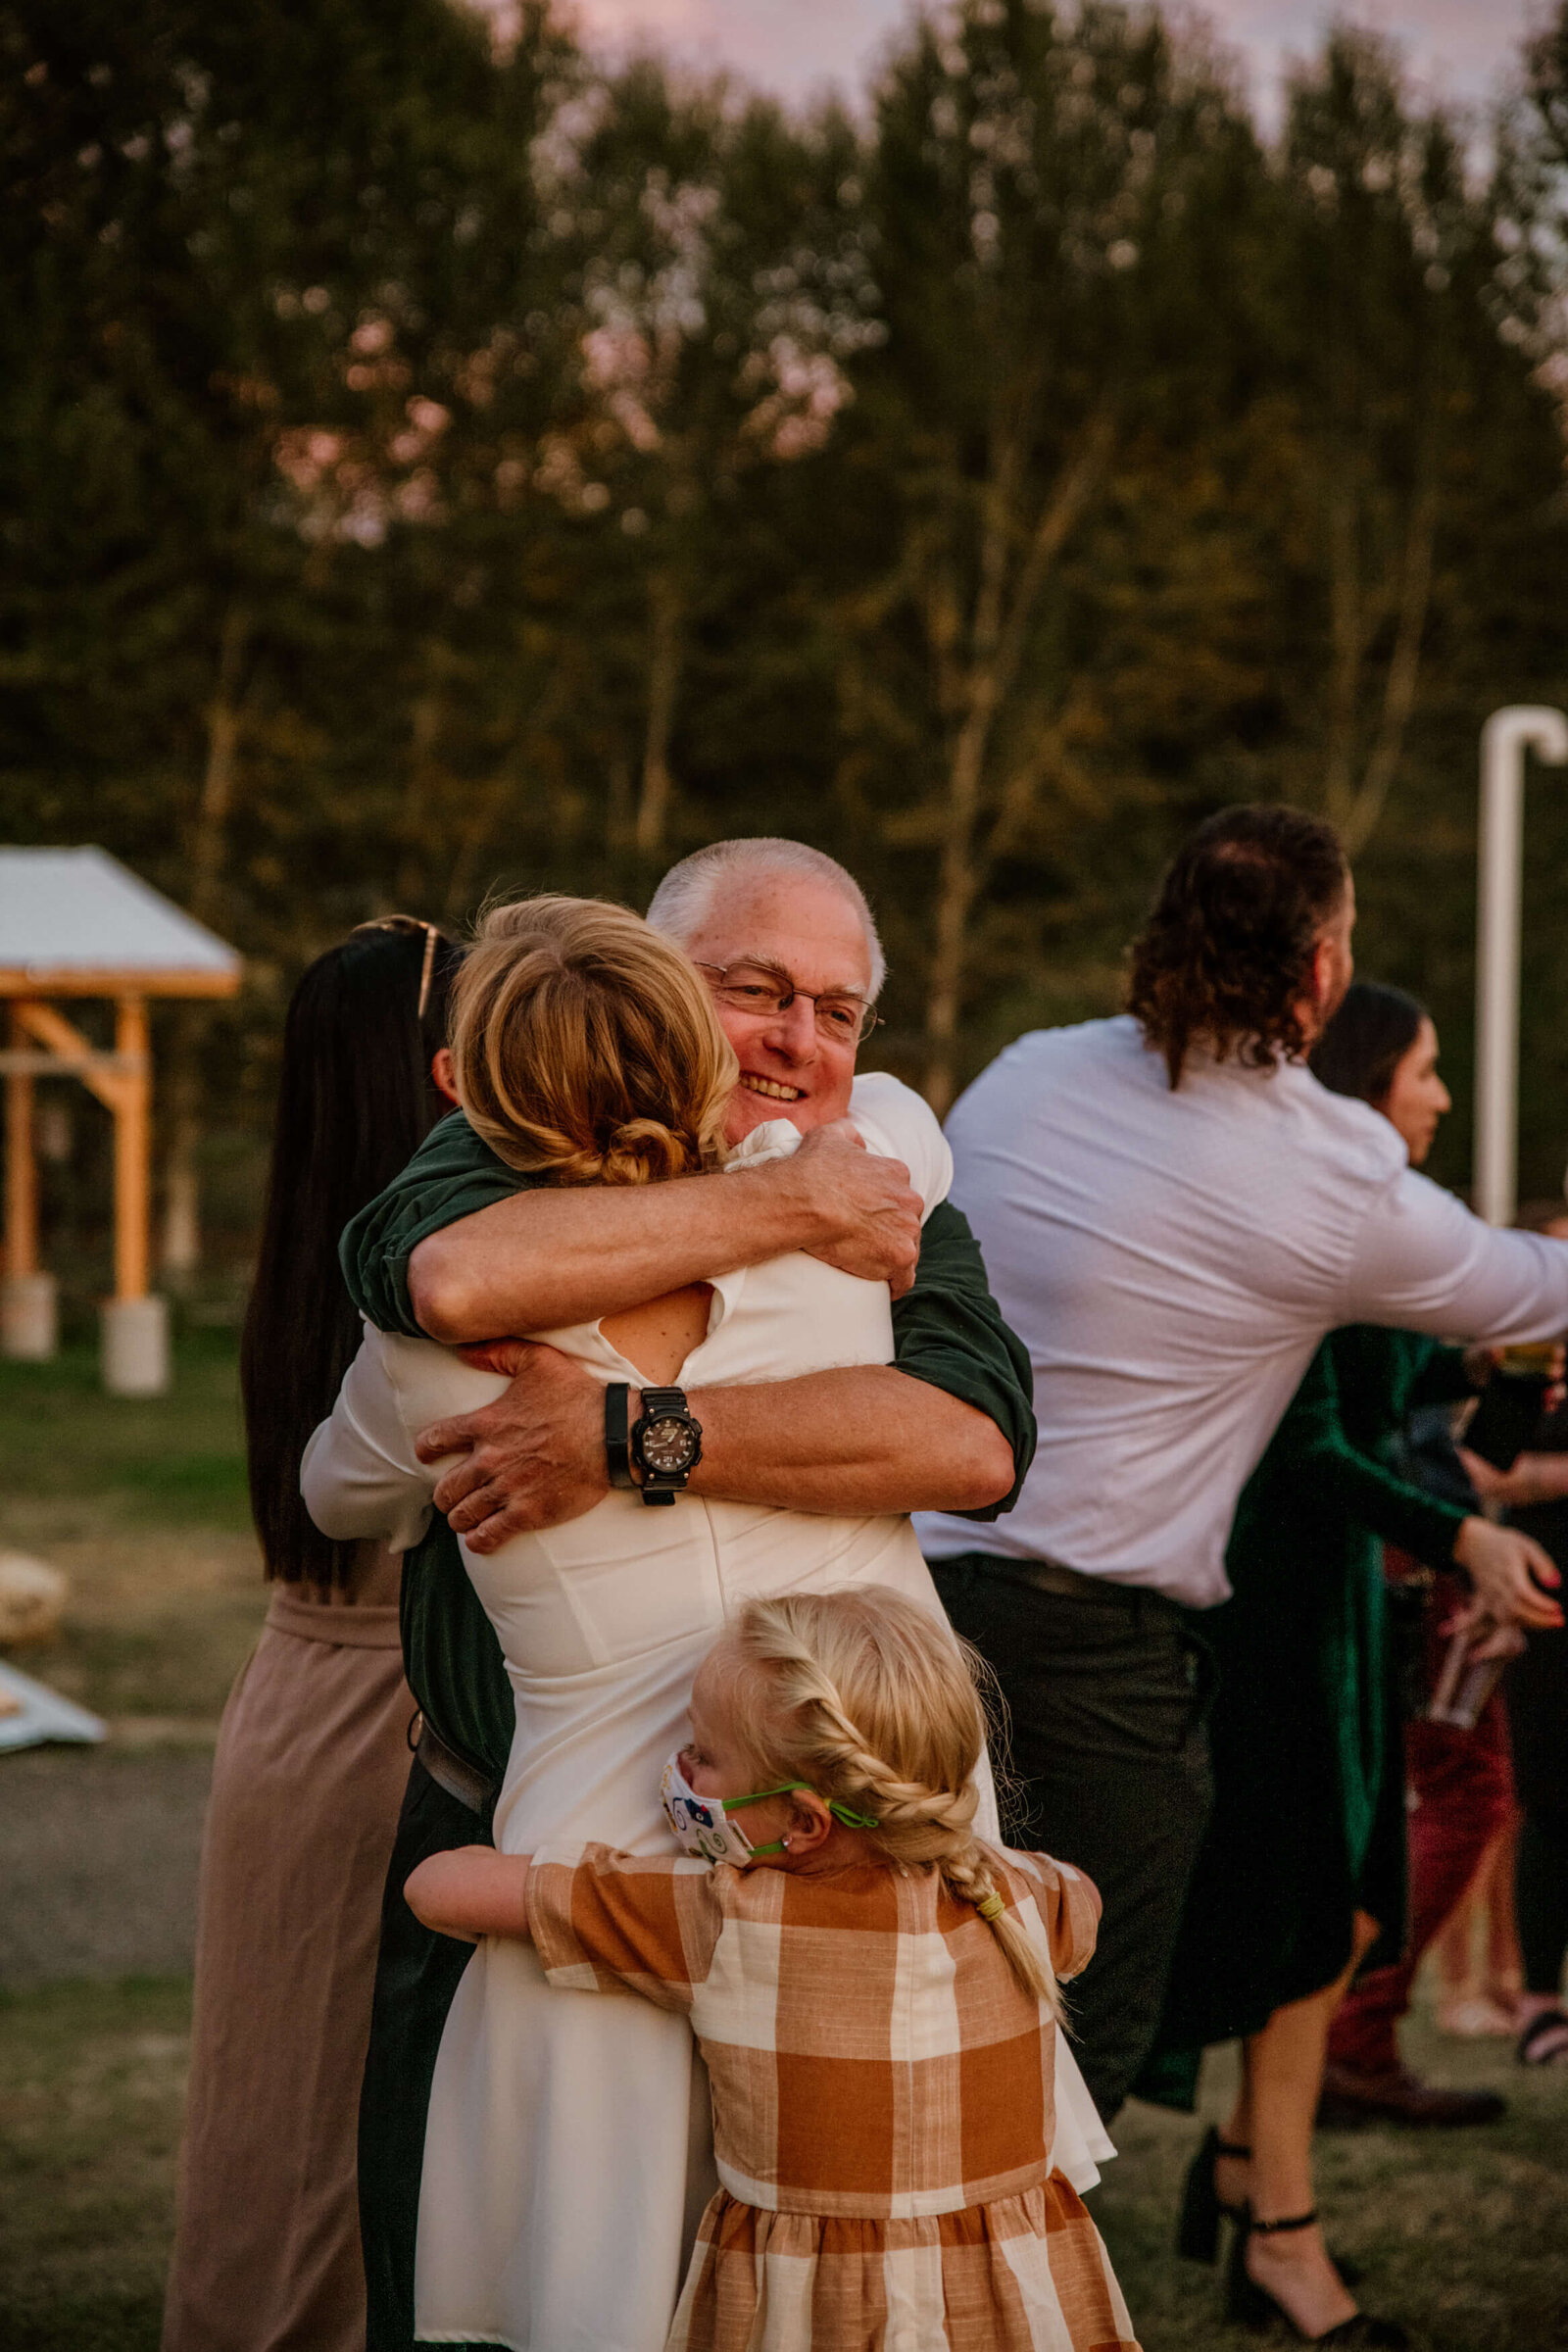 Family embracing Bride after ceremony.